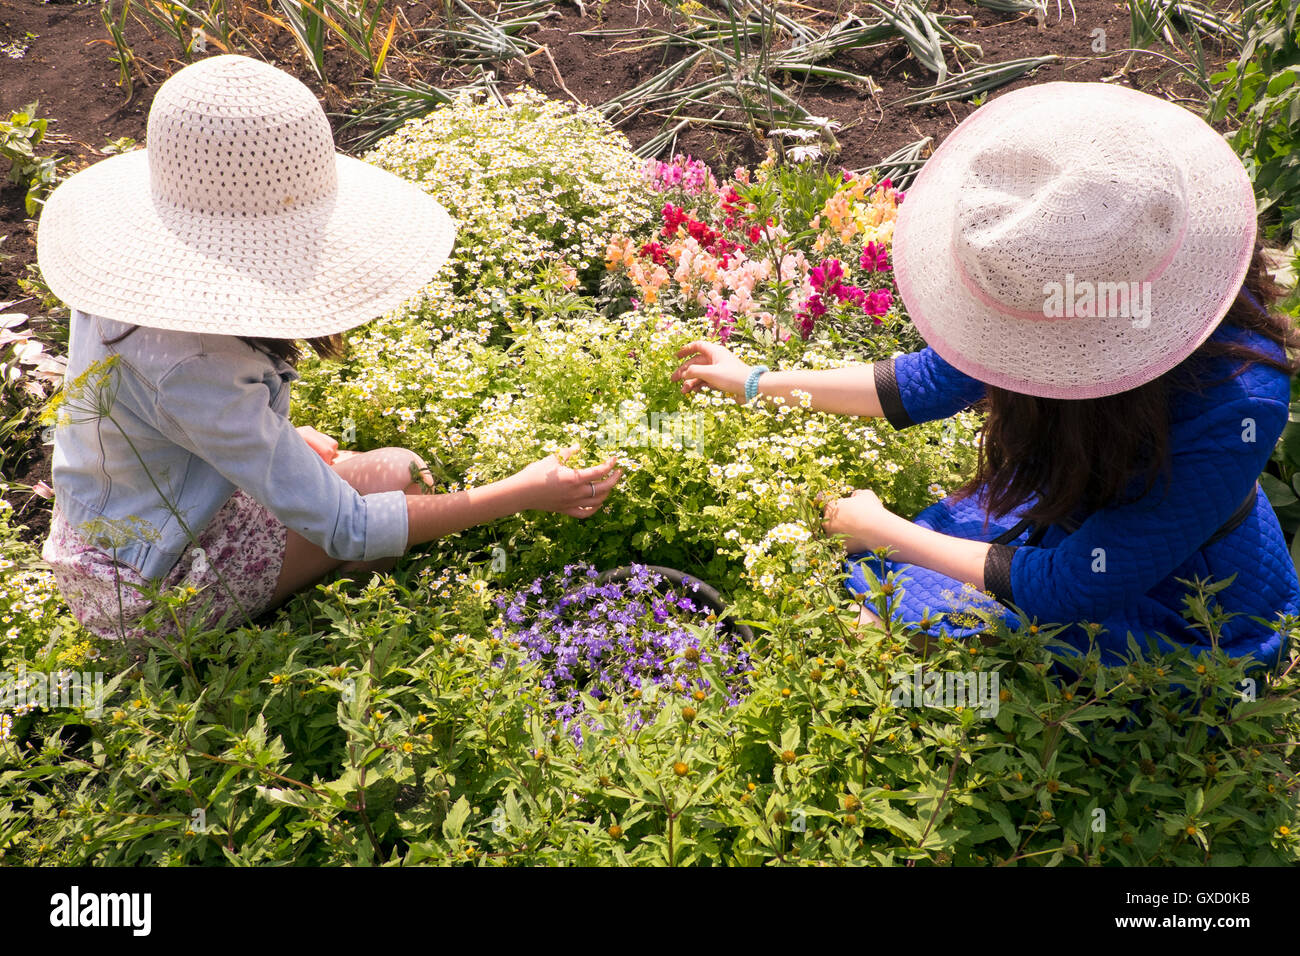 Two females wearing sun hats, tending to plants, overhead view Stock Photo